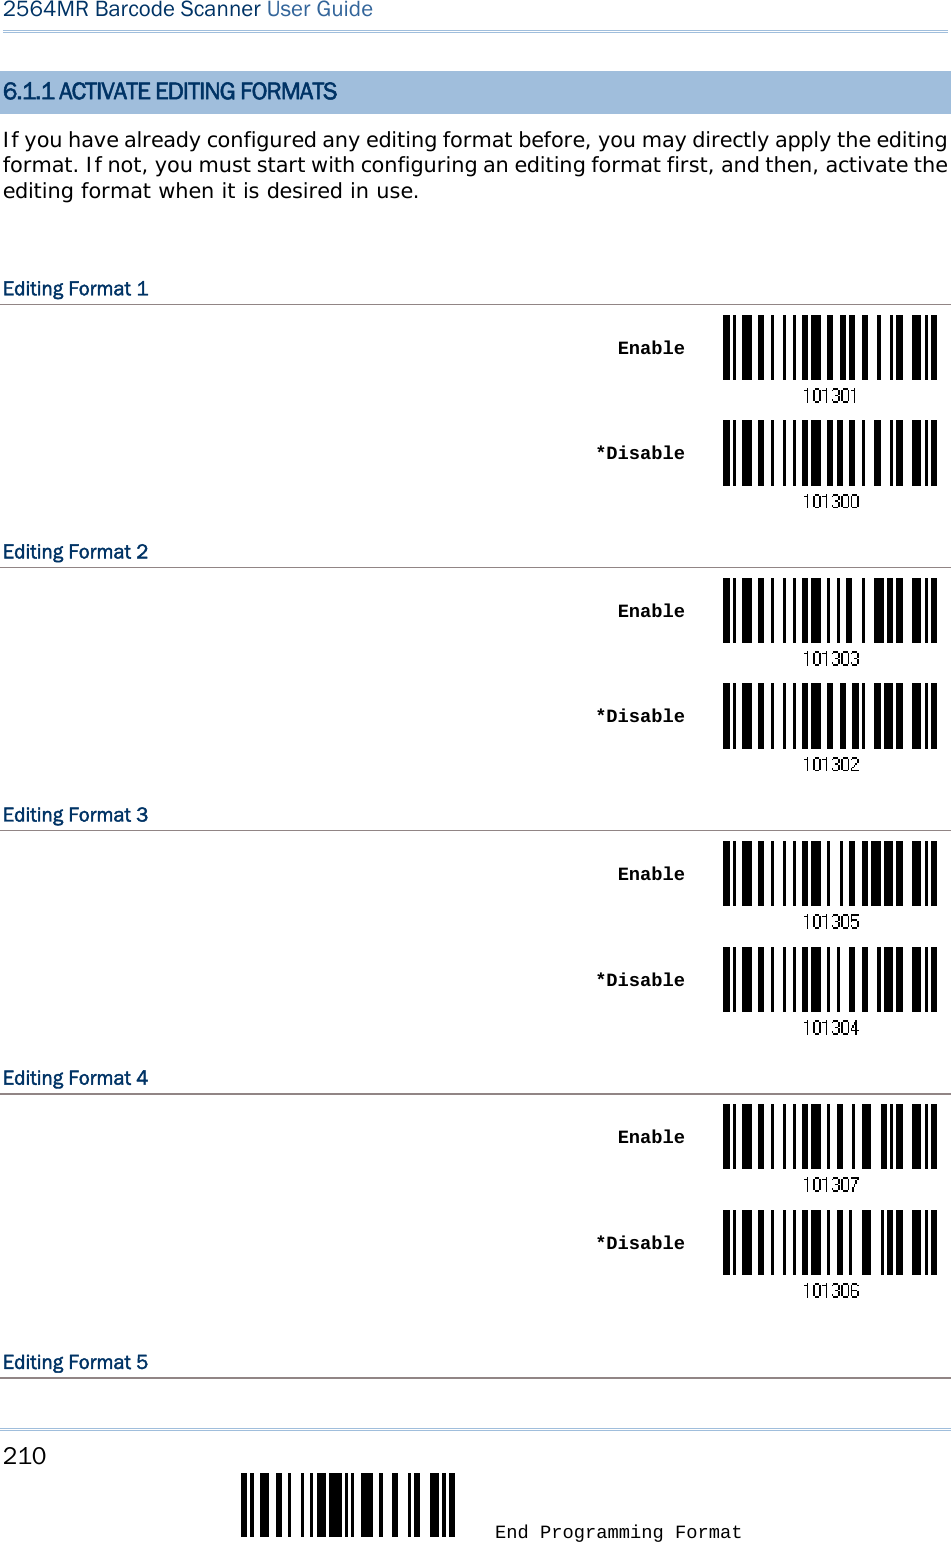 210  End Programming Format 2564MR Barcode Scanner User Guide  6.1.1 ACTIVATE EDITING FORMATS If you have already configured any editing format before, you may directly apply the editing format. If not, you must start with configuring an editing format first, and then, activate the editing format when it is desired in use.  Editing Format 1  Enable *DisableEditing Format 2  Enable *DisableEditing Format 3  Enable *DisableEditing Format 4  Enable *Disable Editing Format 5 